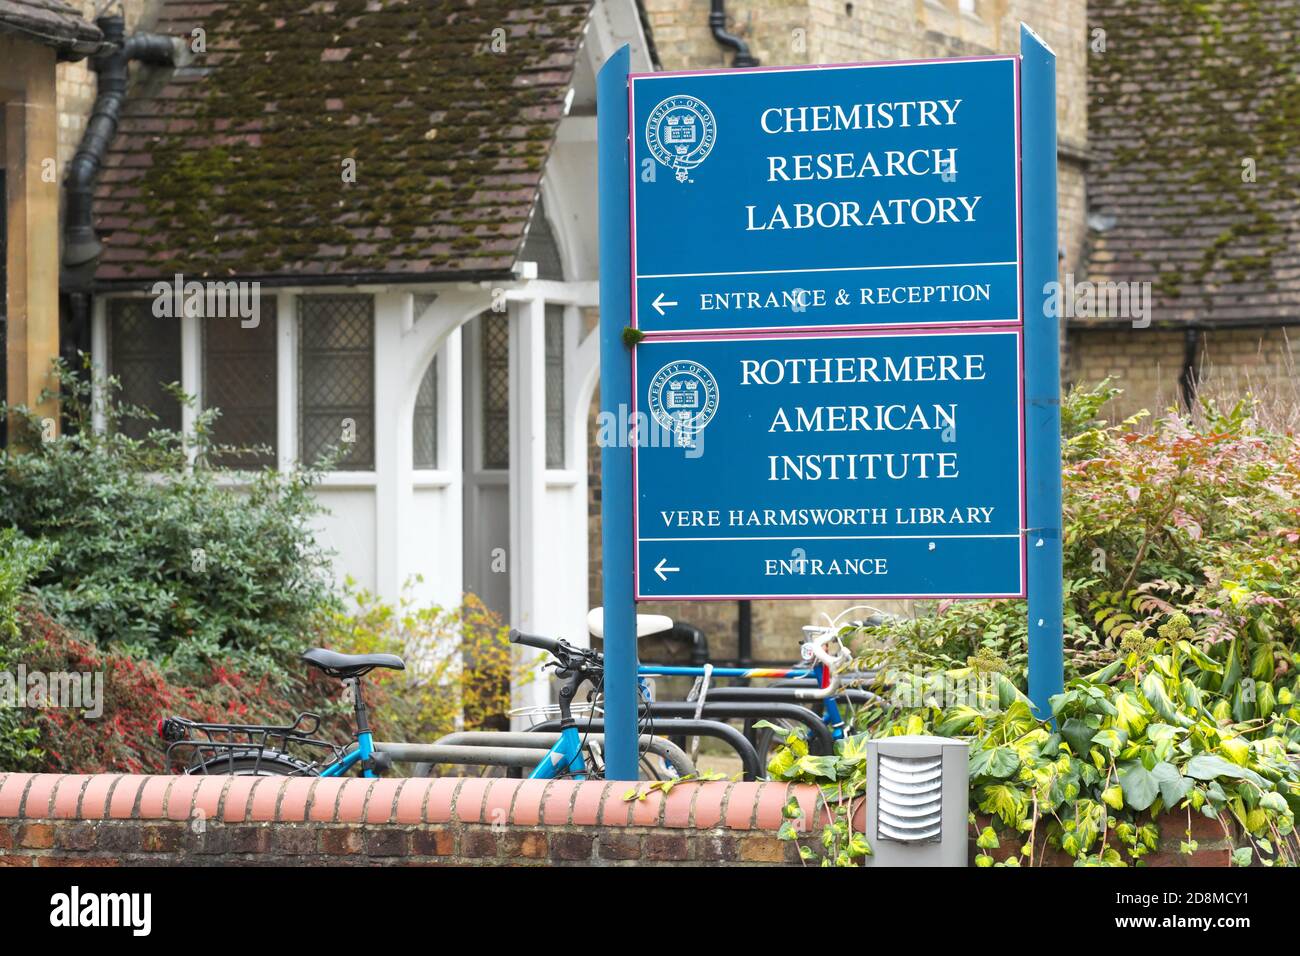 University of Oxford the Chemistry Research Laboratory and Rothermere American Institute in Oxford UK Stock Photo